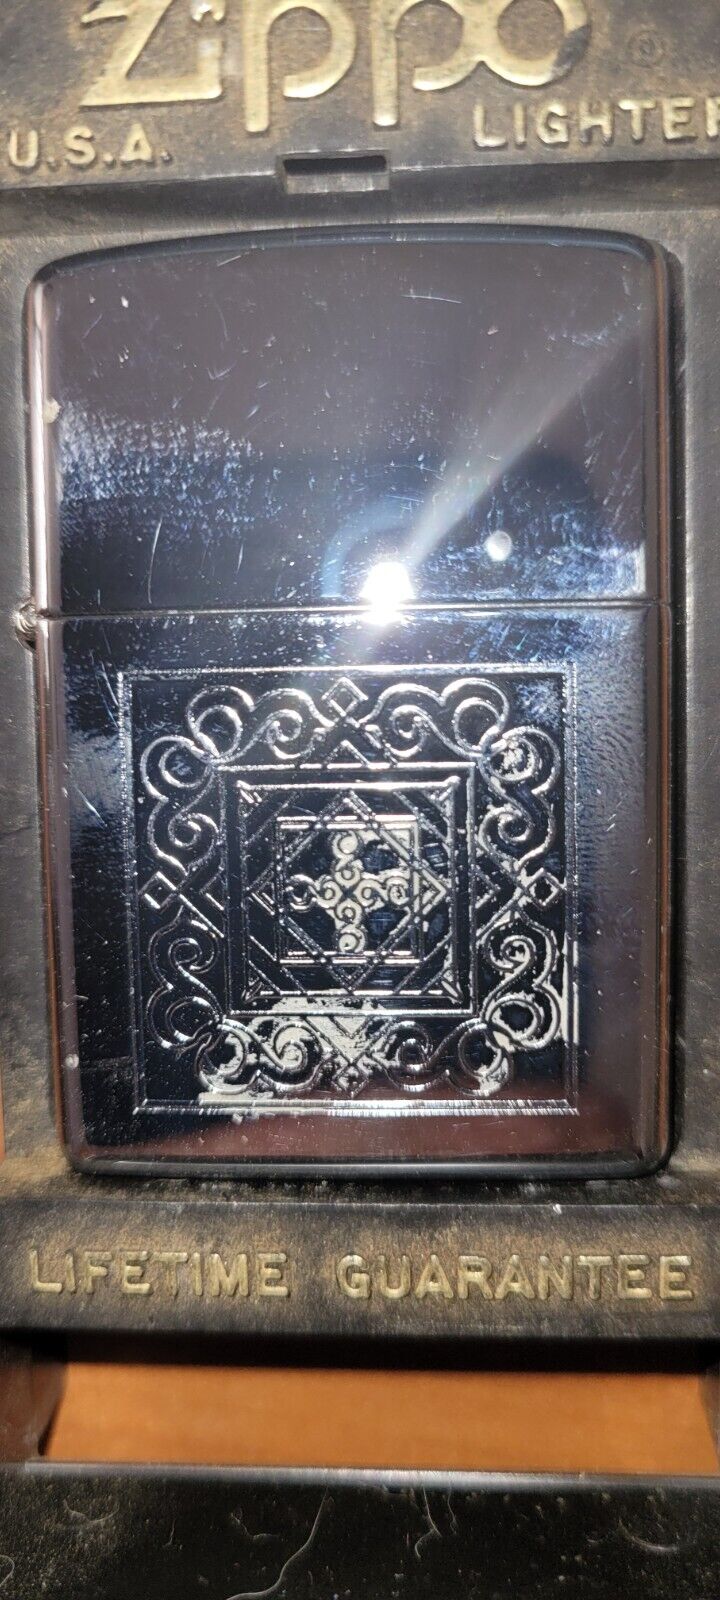 2000 XVI Zippo With etching of cross center inside of spiral designs